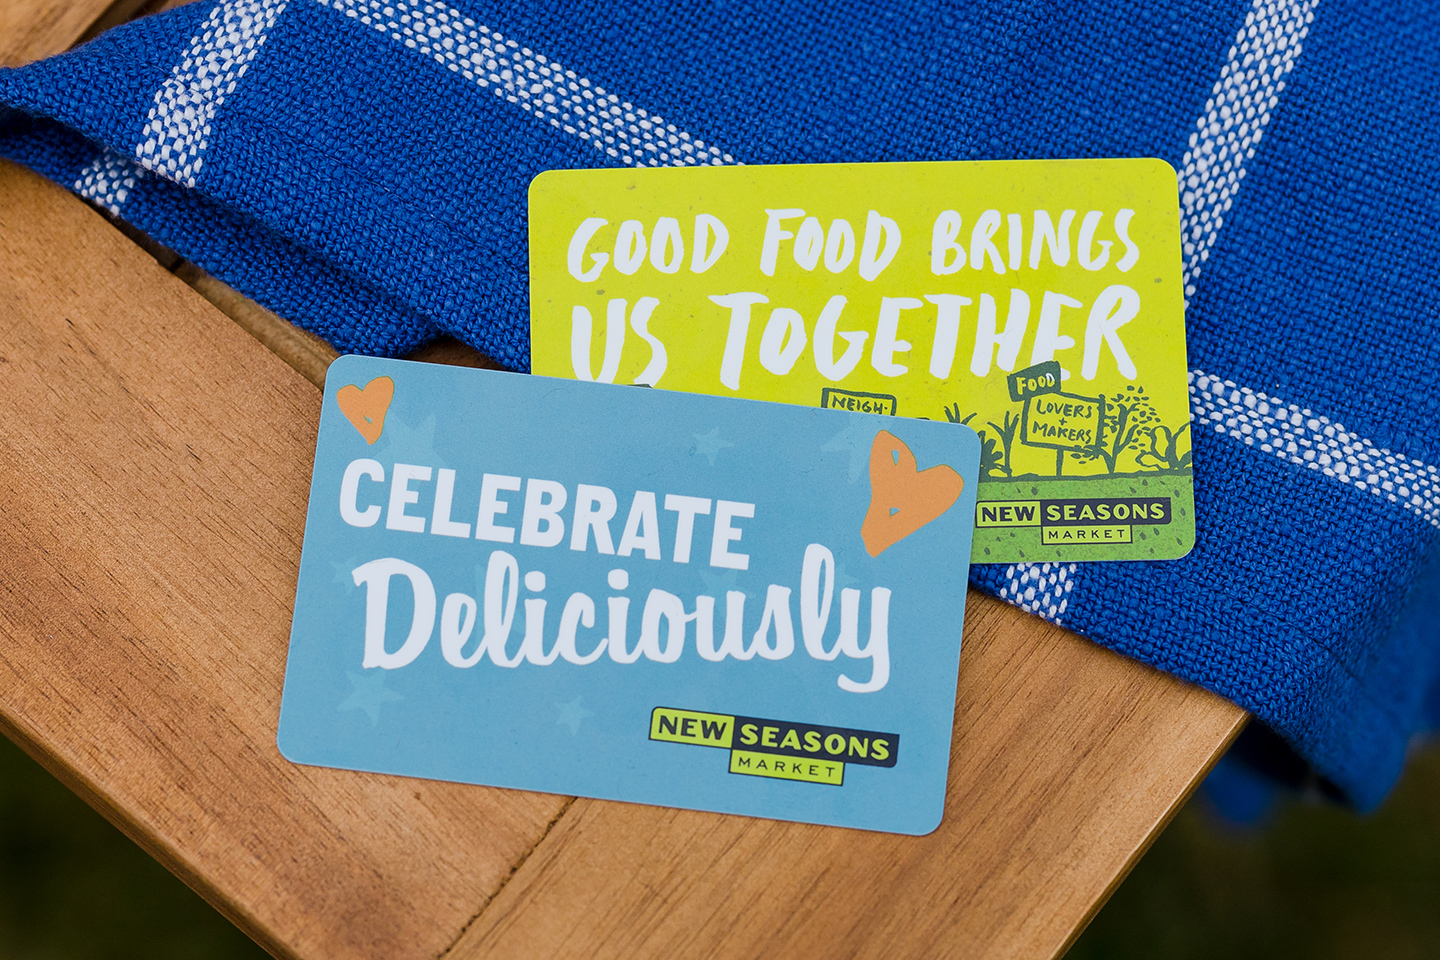 New Seasons Market gift cards with the words "good food brings us together" and "celebrate deliciously" placed on a table with a blue towel underneath.